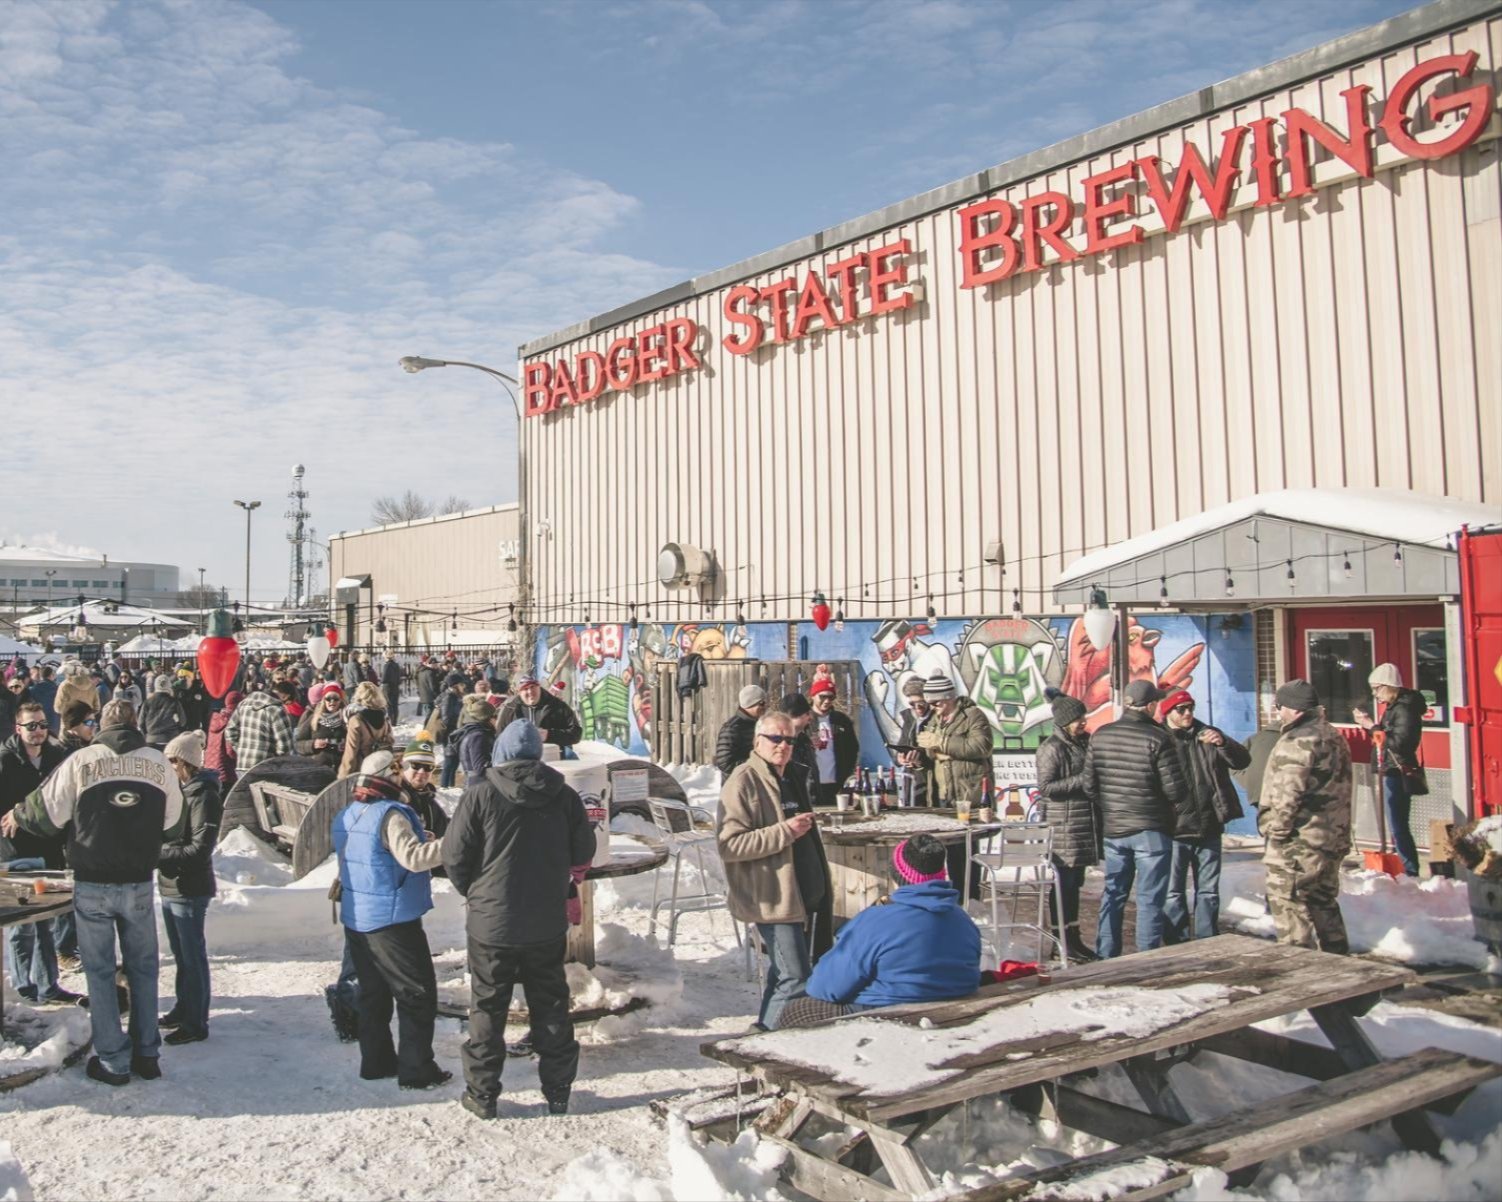 Frozen Firkins Winter Beer Festival at Badger State Brewing Company